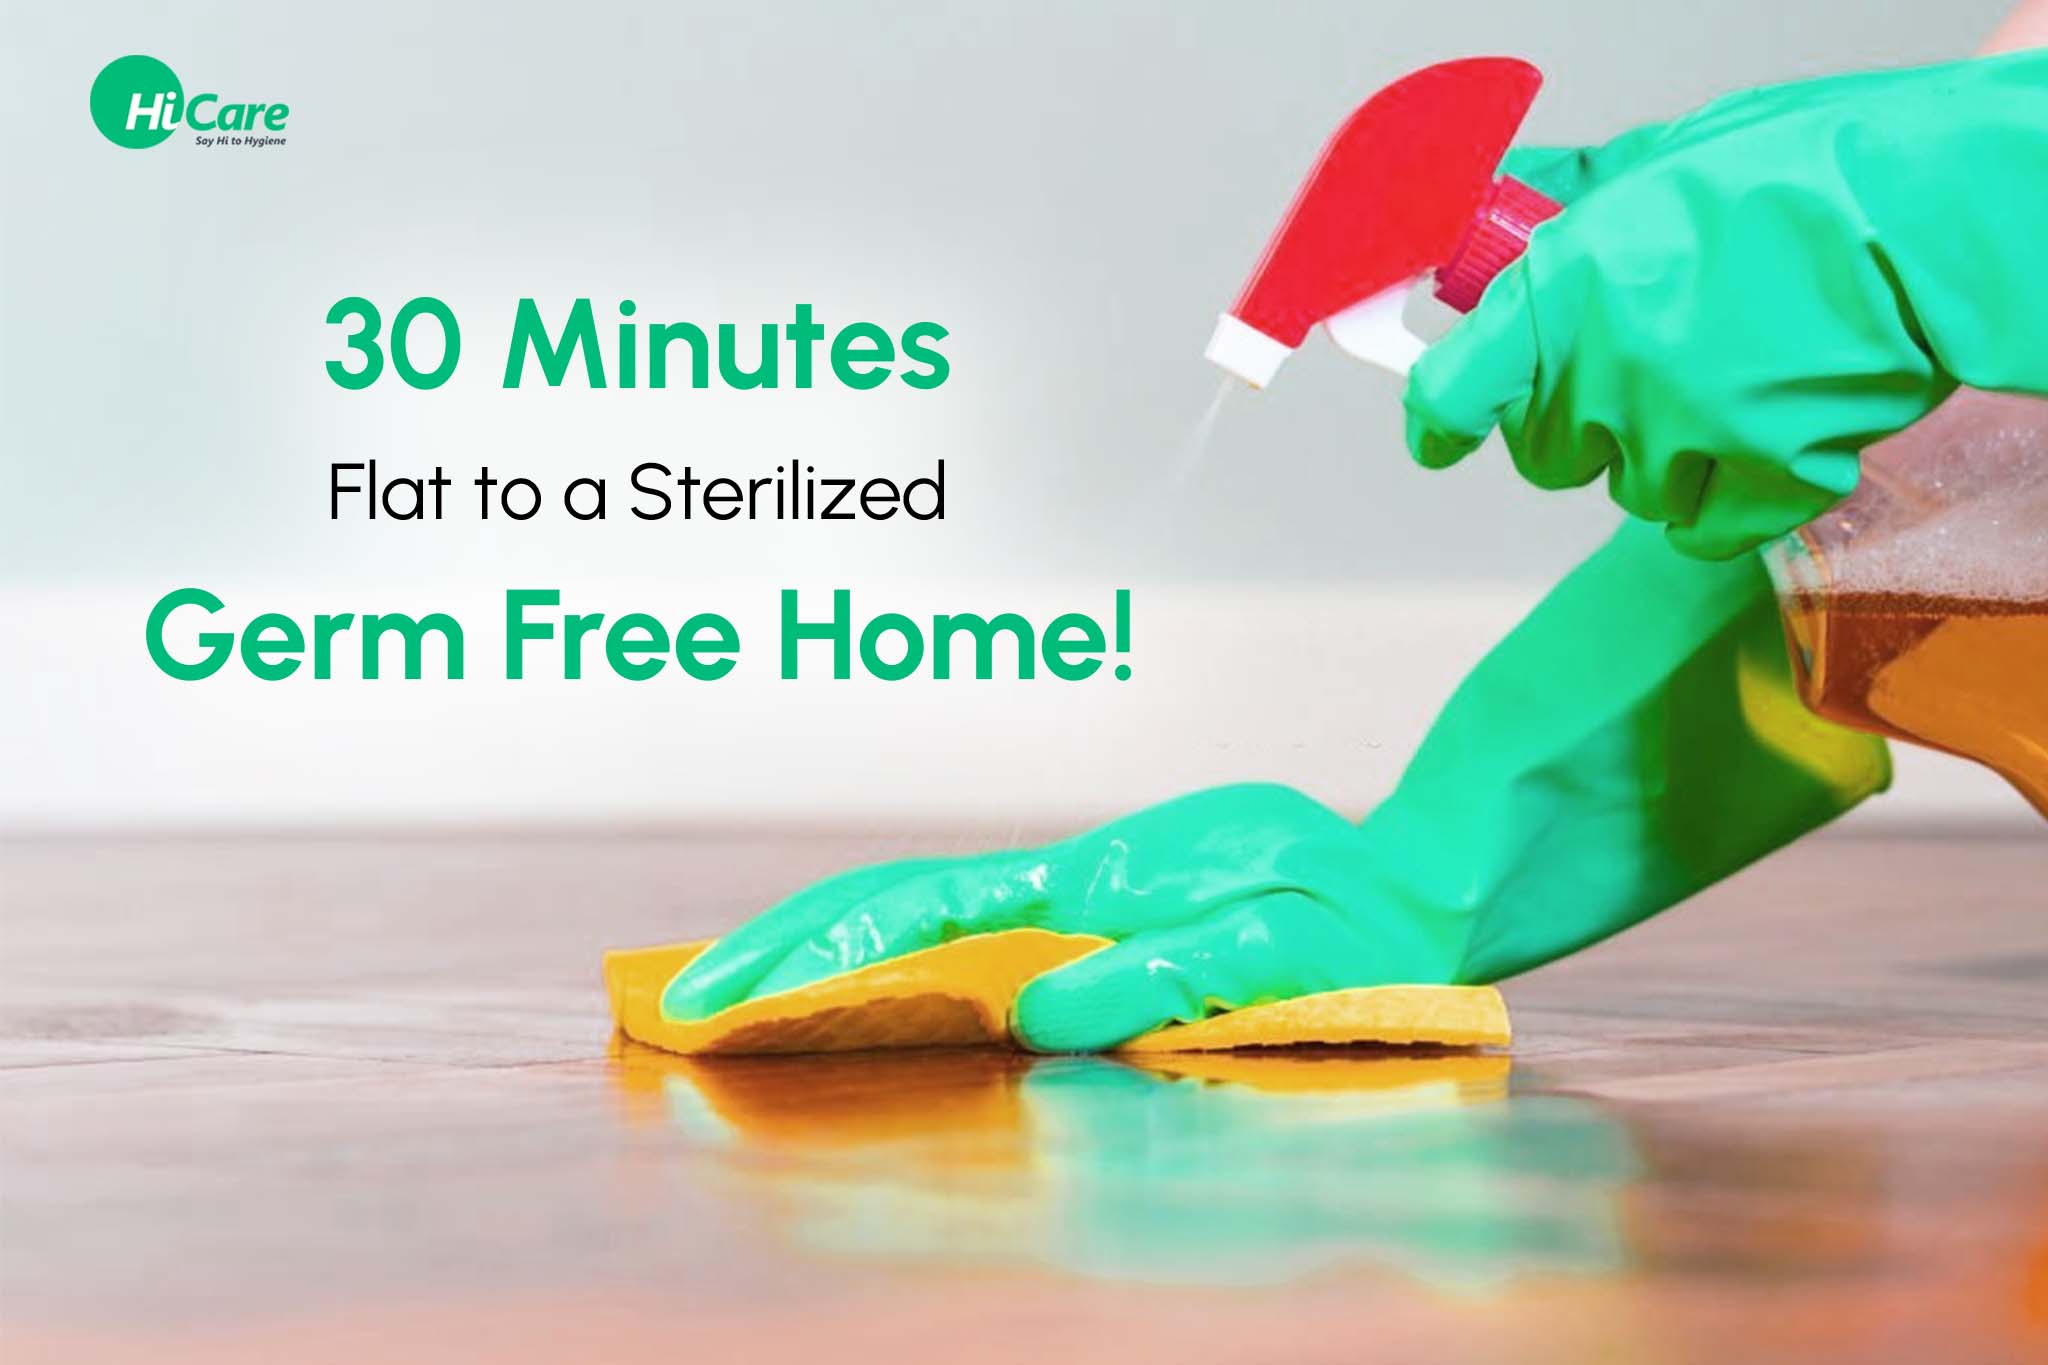 30 Minutes Flat to a Sterilized Germ Free Home!